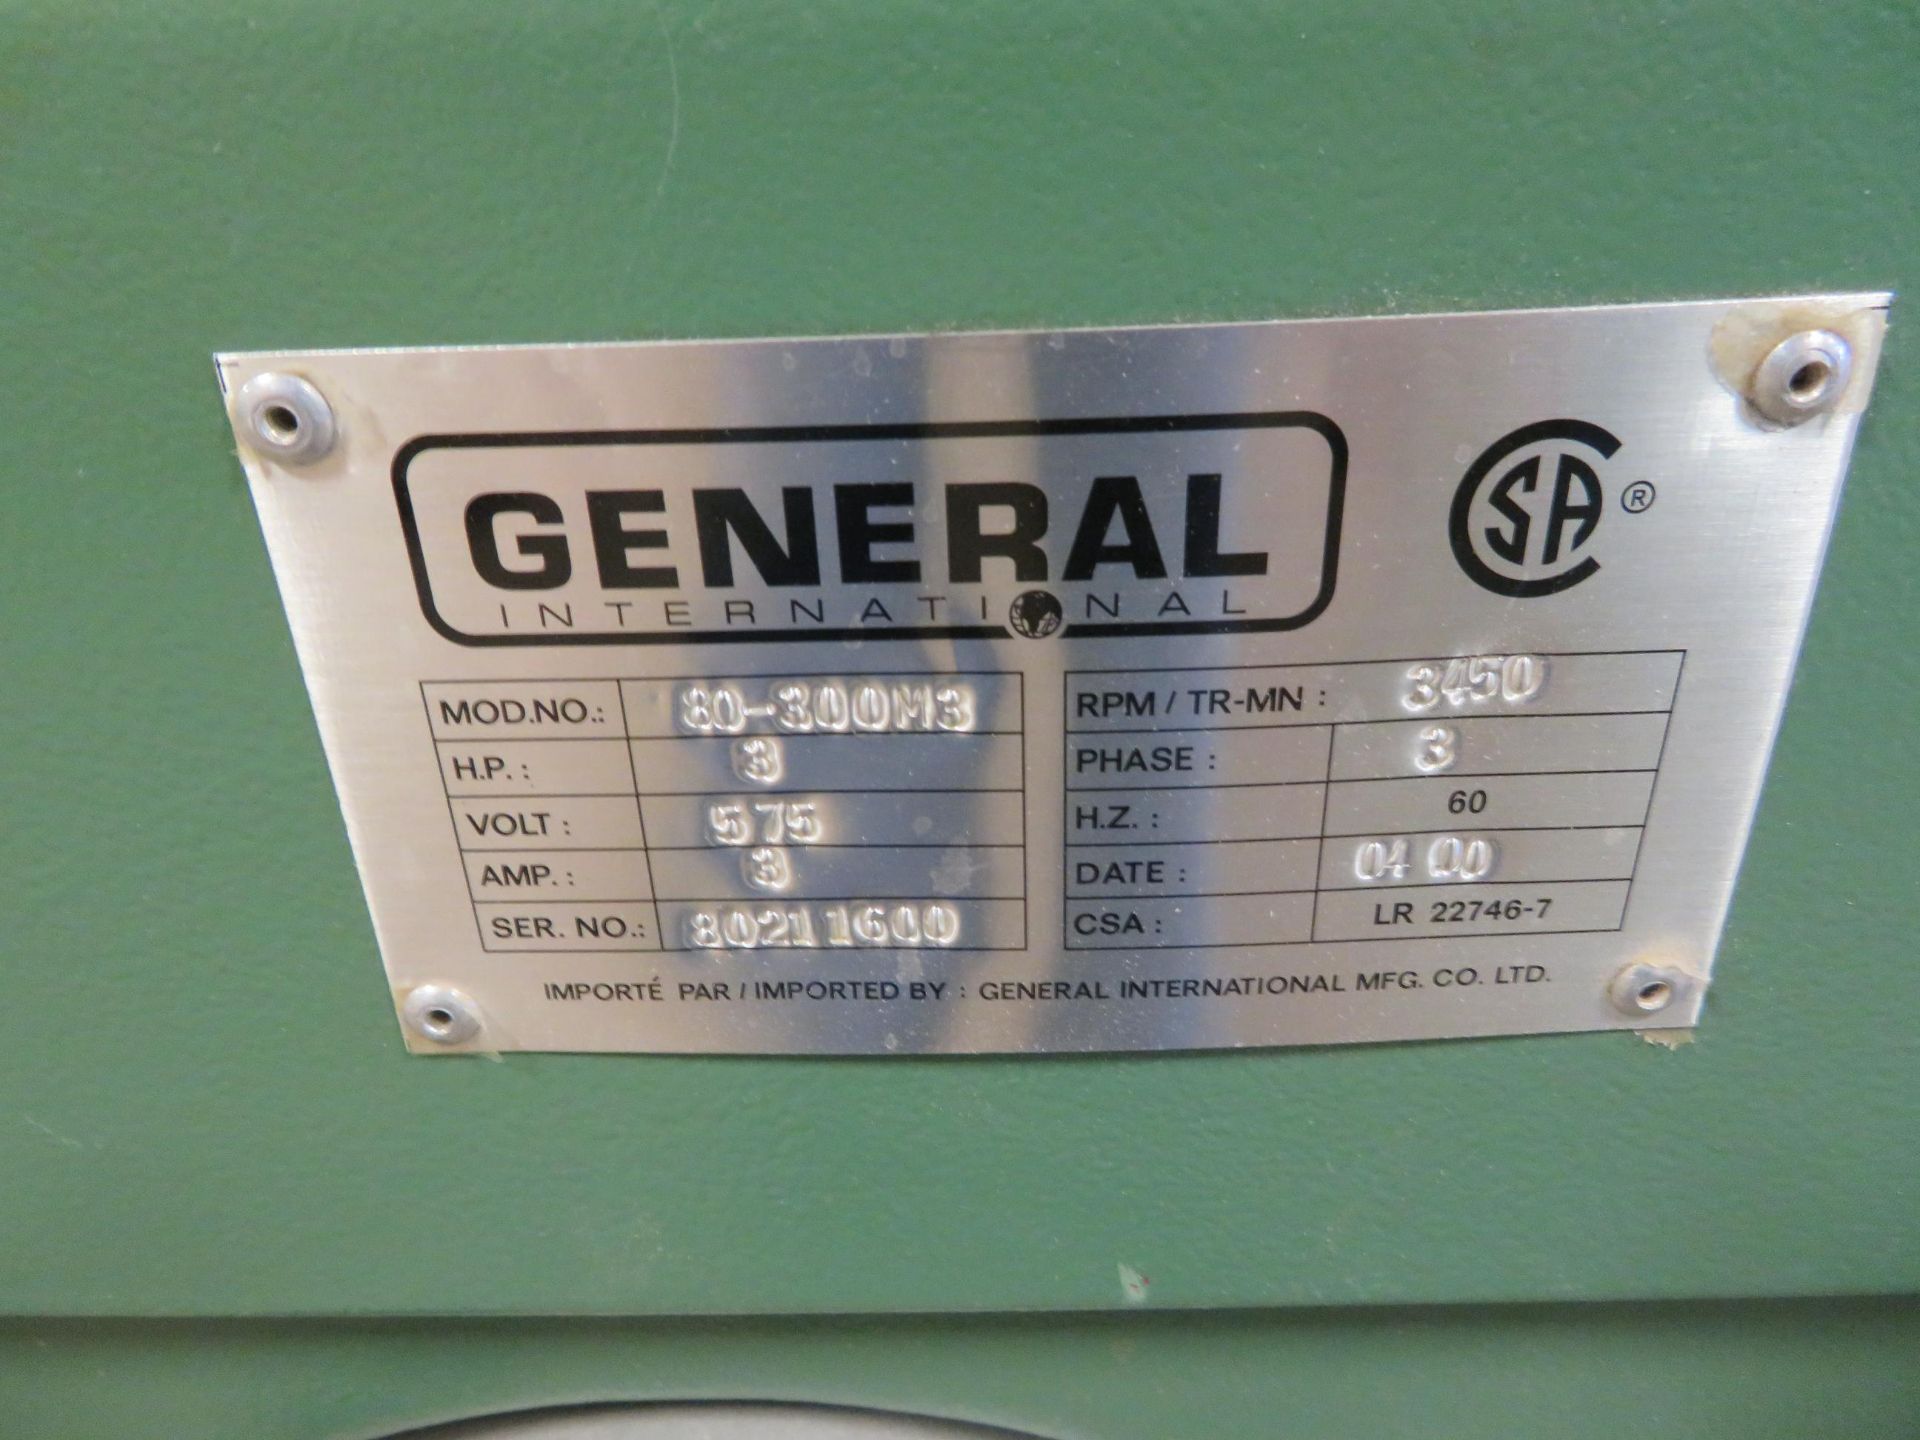 GENERAL 12" jointer, Mod# 80-300M3, 575 Volts, 3 PH, 60 HZ - Image 3 of 4